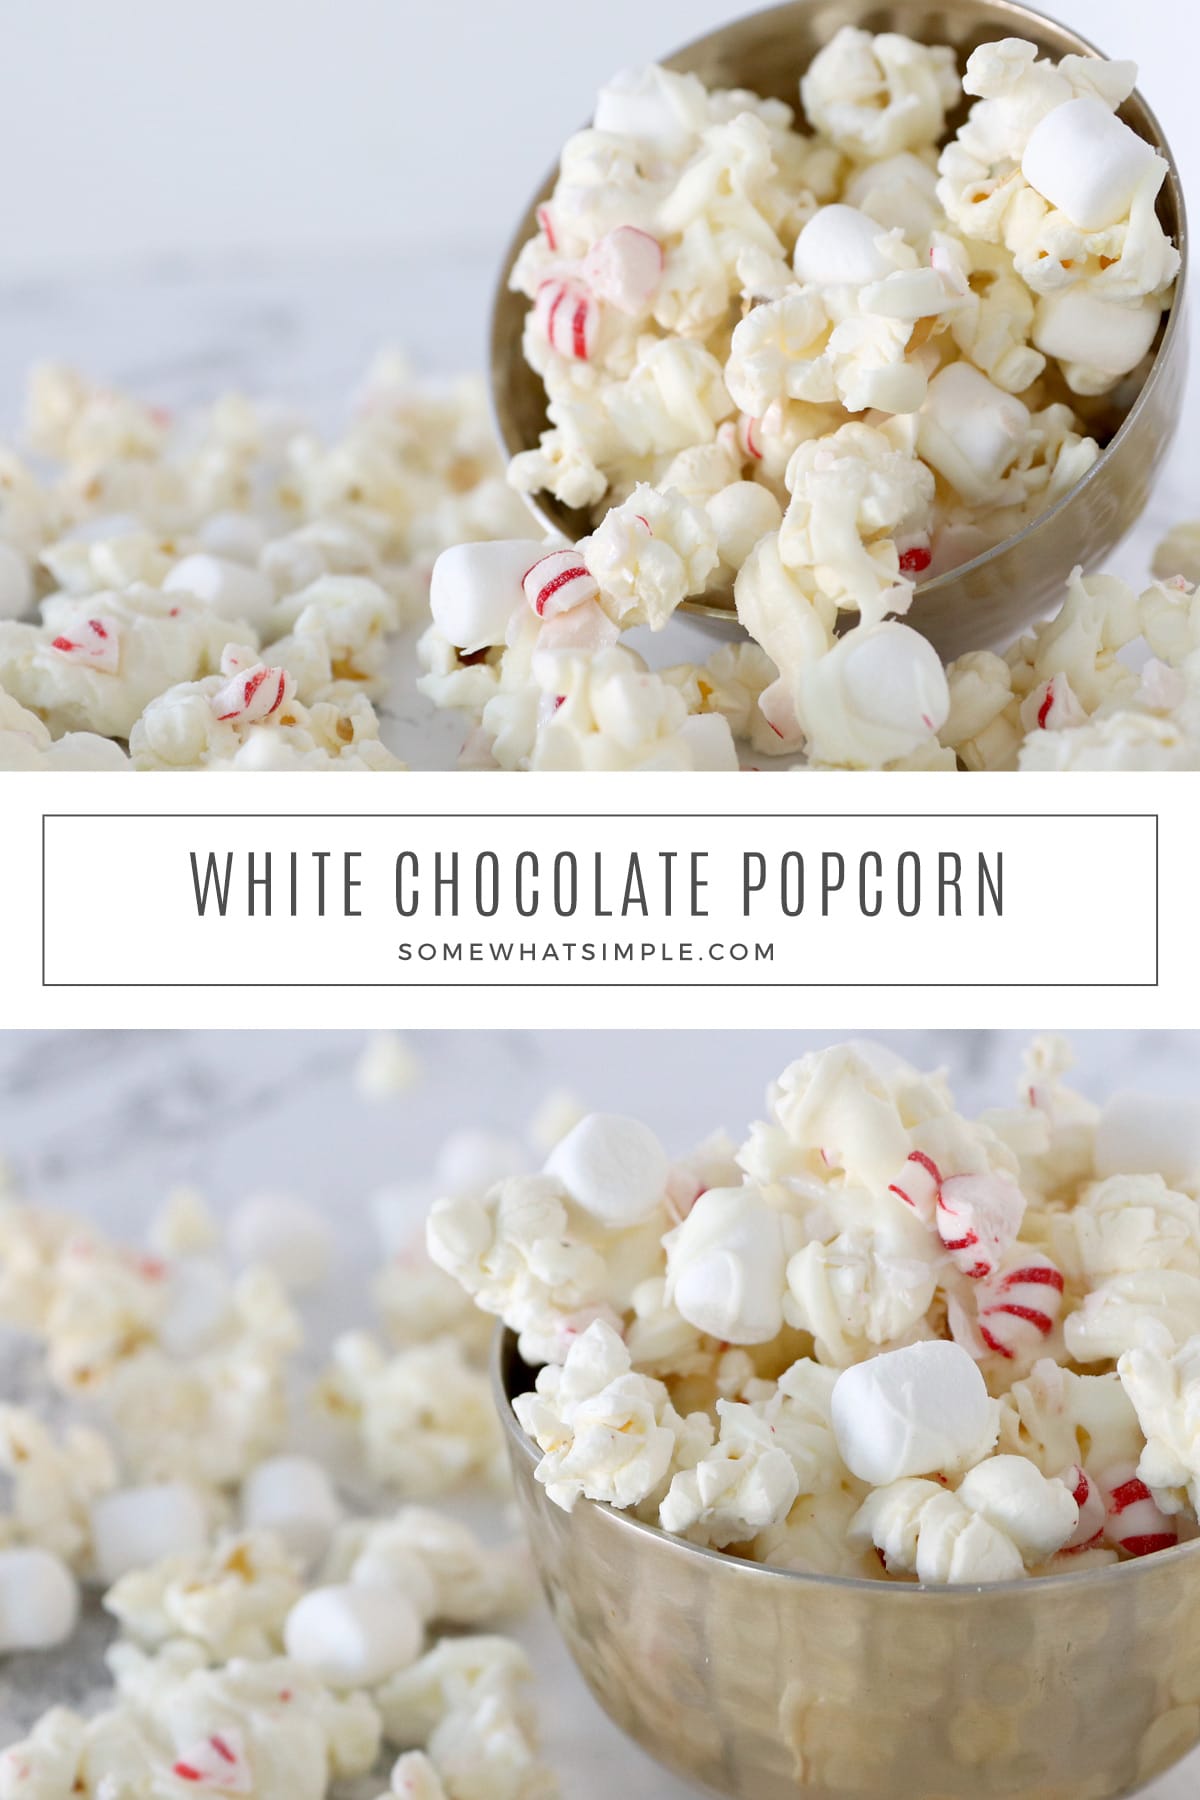 This peppermint popcorn is a simple white chocolate popcorn recipe packed with little bites of marshmallows and peppermint candies! This festive snack is perfect for any holiday celebration. via @somewhatsimple